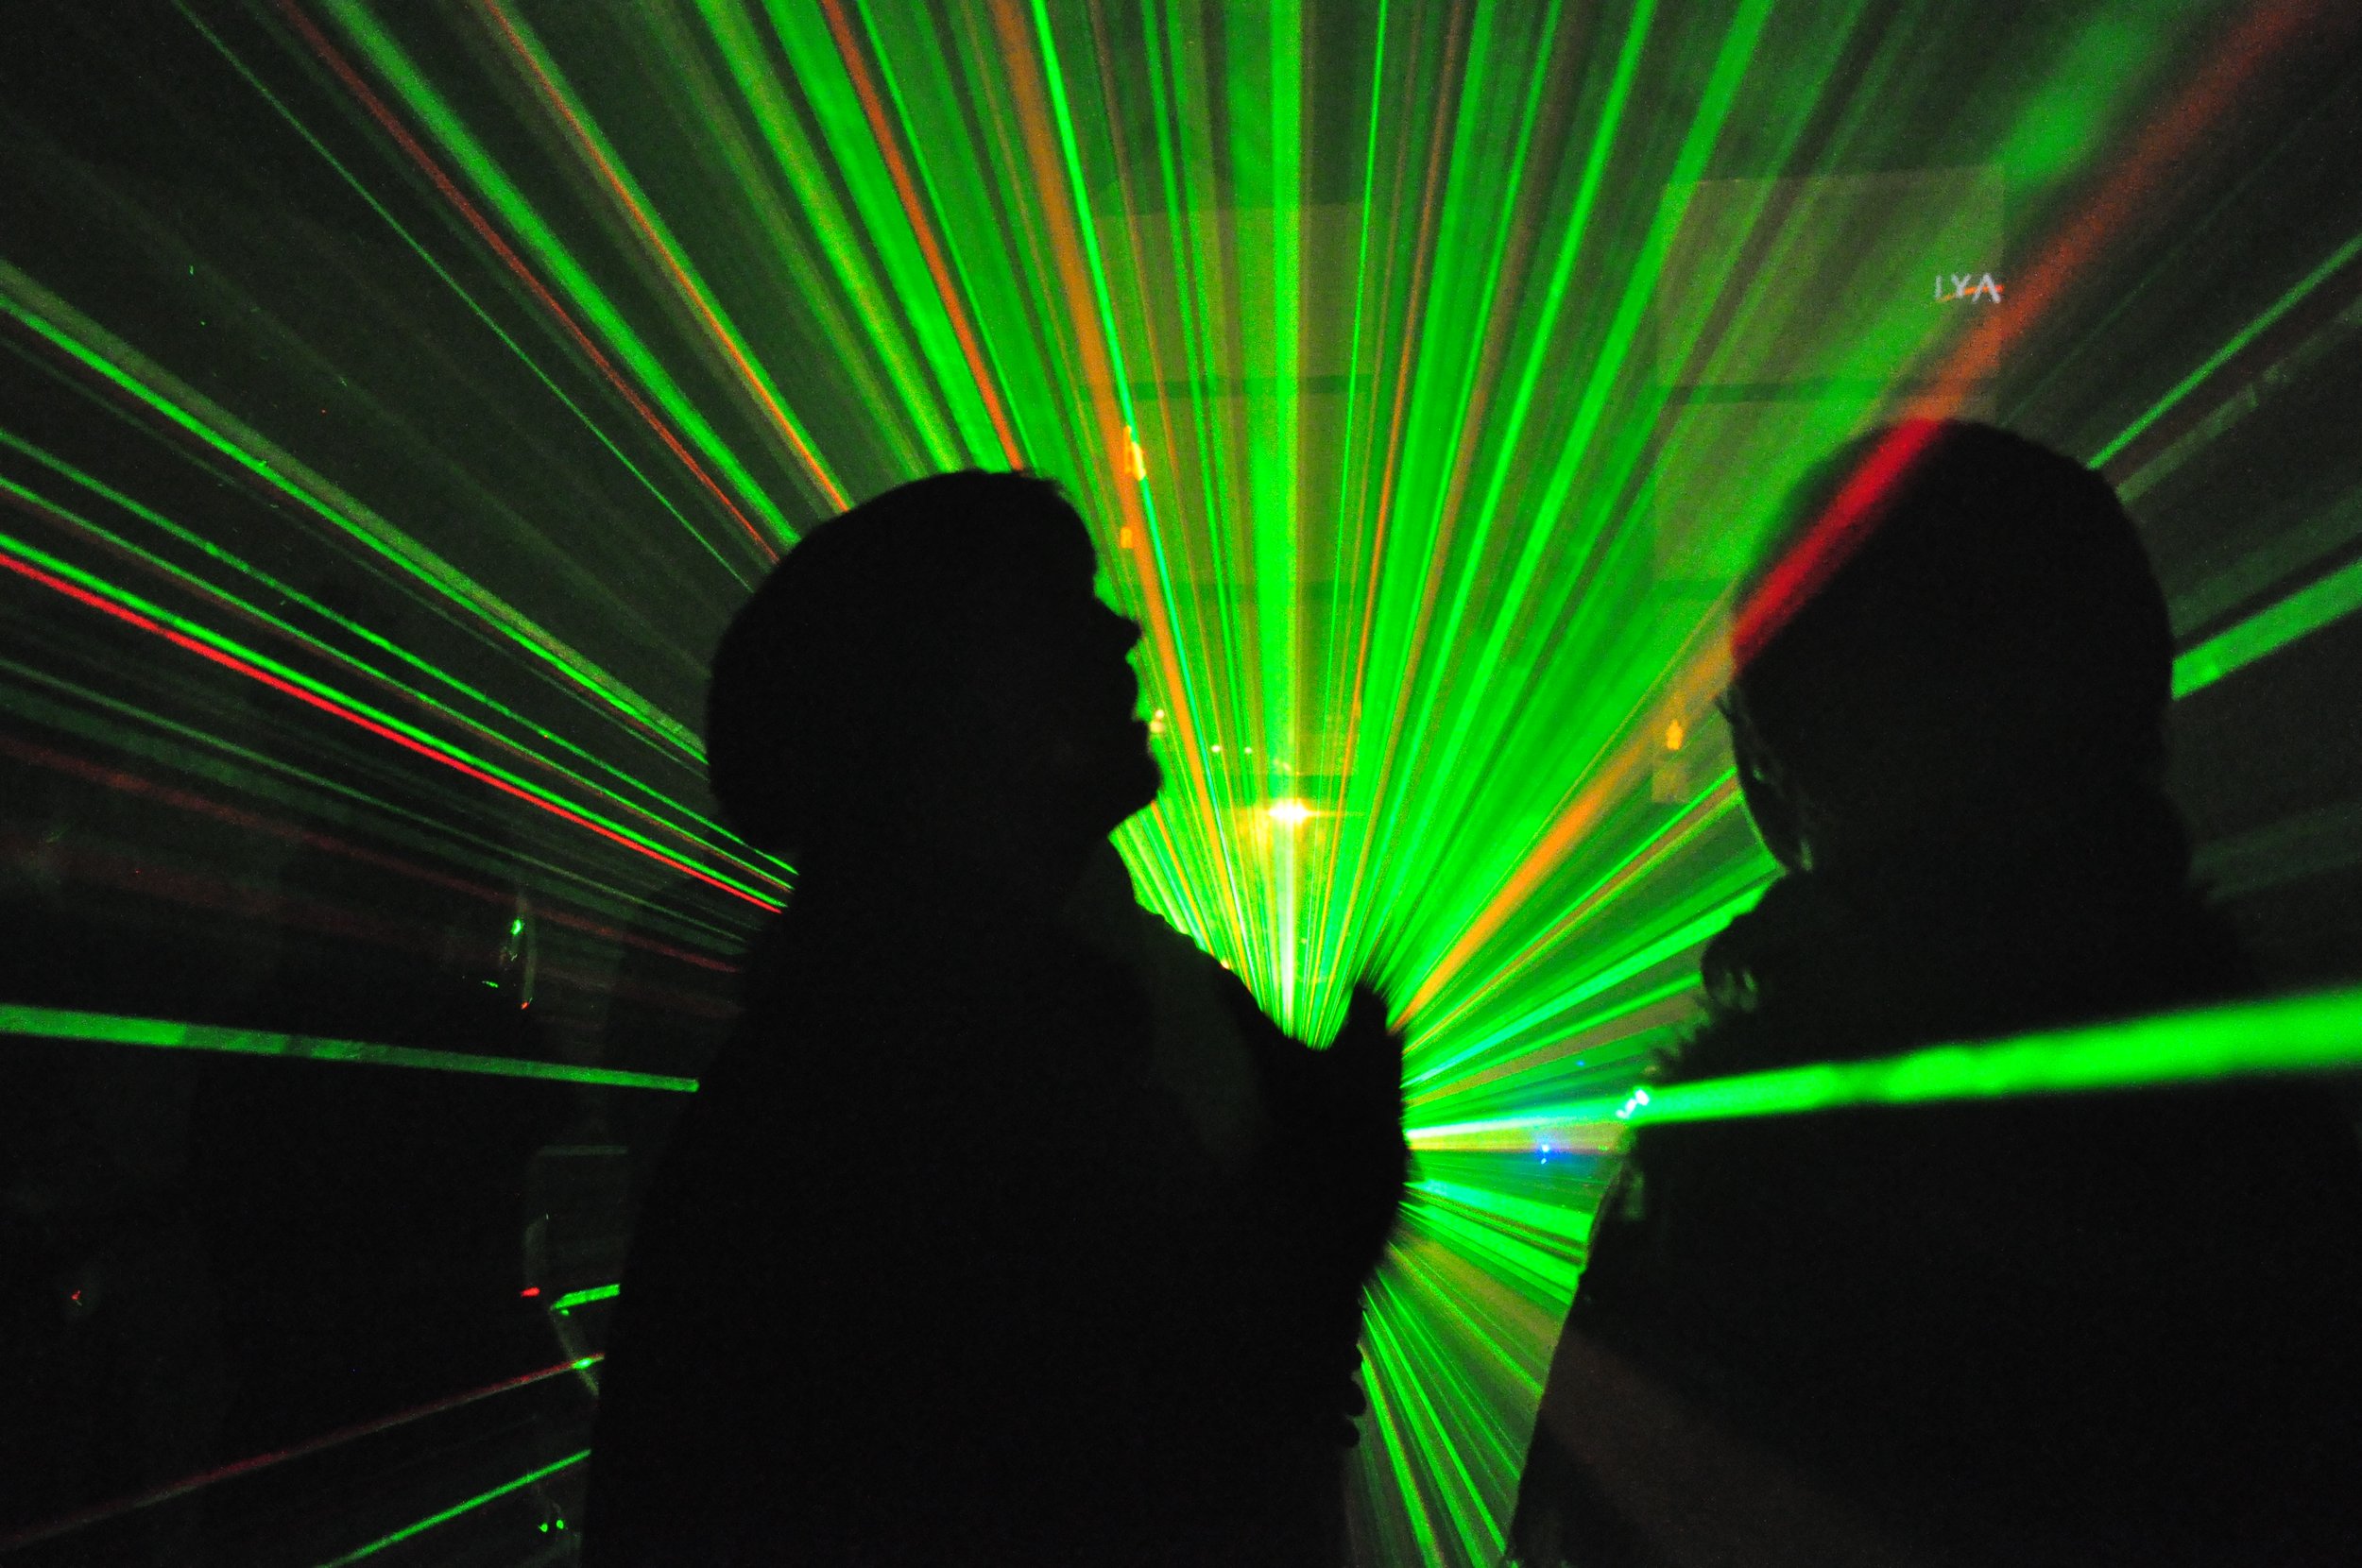   Seven Dreams , afterparty with a fog of new wave, industrial, pop, screwed jams and a laser light show; live performances by Anna Ranger, DJ Scott Neimet, DJ Seabat and DJ Self Help. Skylab, Columbus, Ohio, January 27, 2011. 